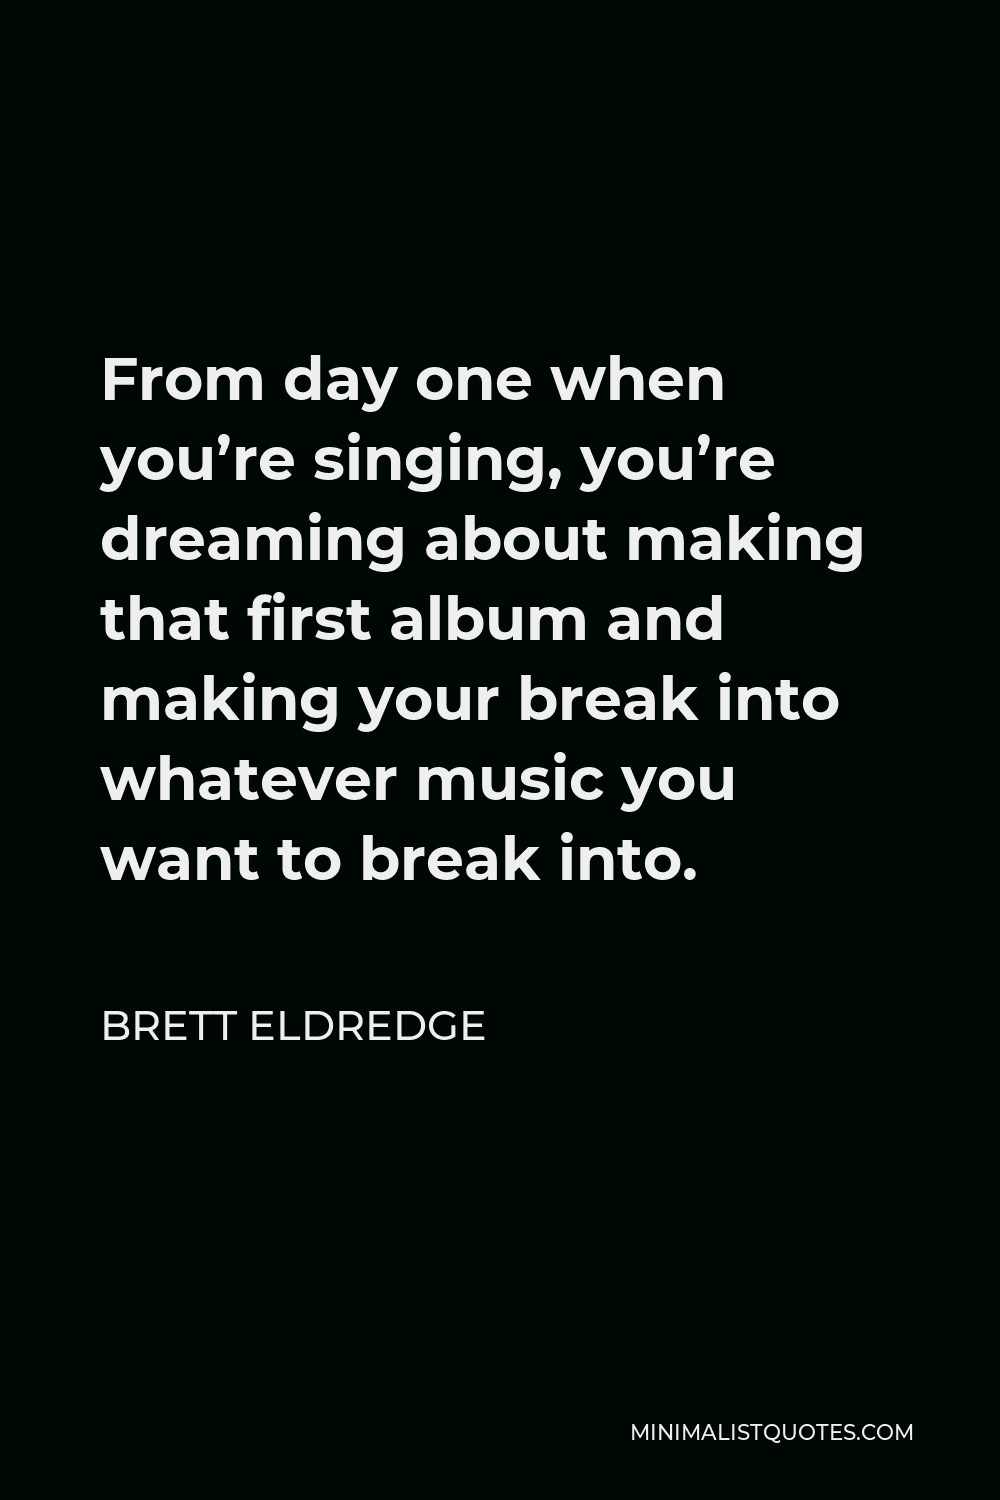 Brett Eldredge Quote - From day one when you’re singing, you’re dreaming about making that first album and making your break into whatever music you want to break into.